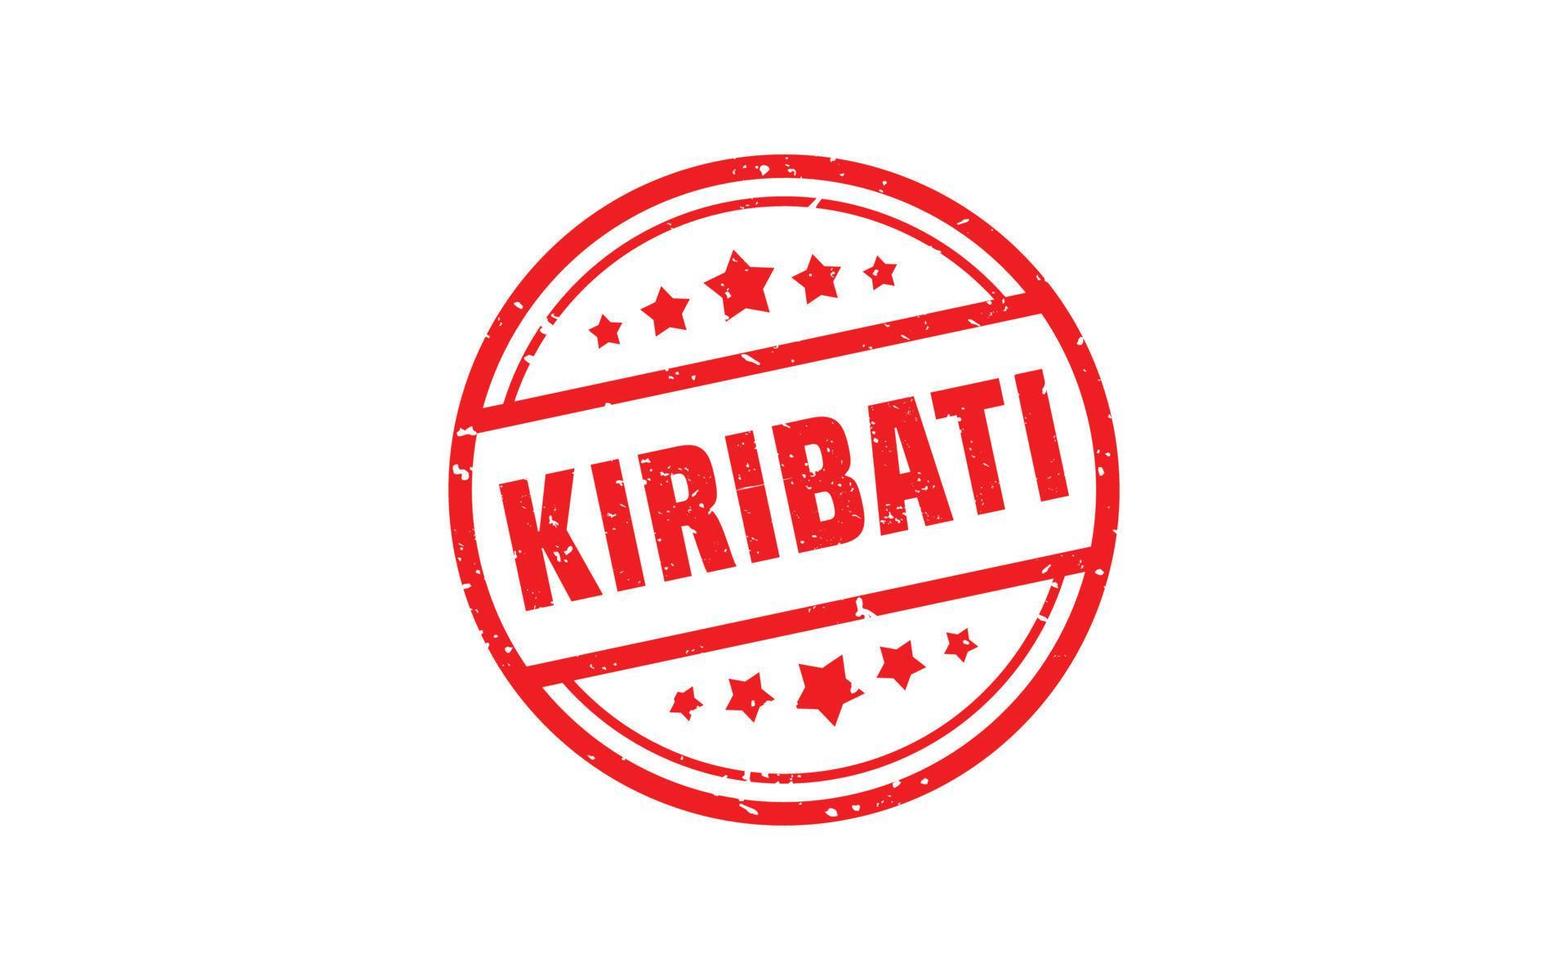 KIRIBATI stamp rubber with grunge style on white background vector